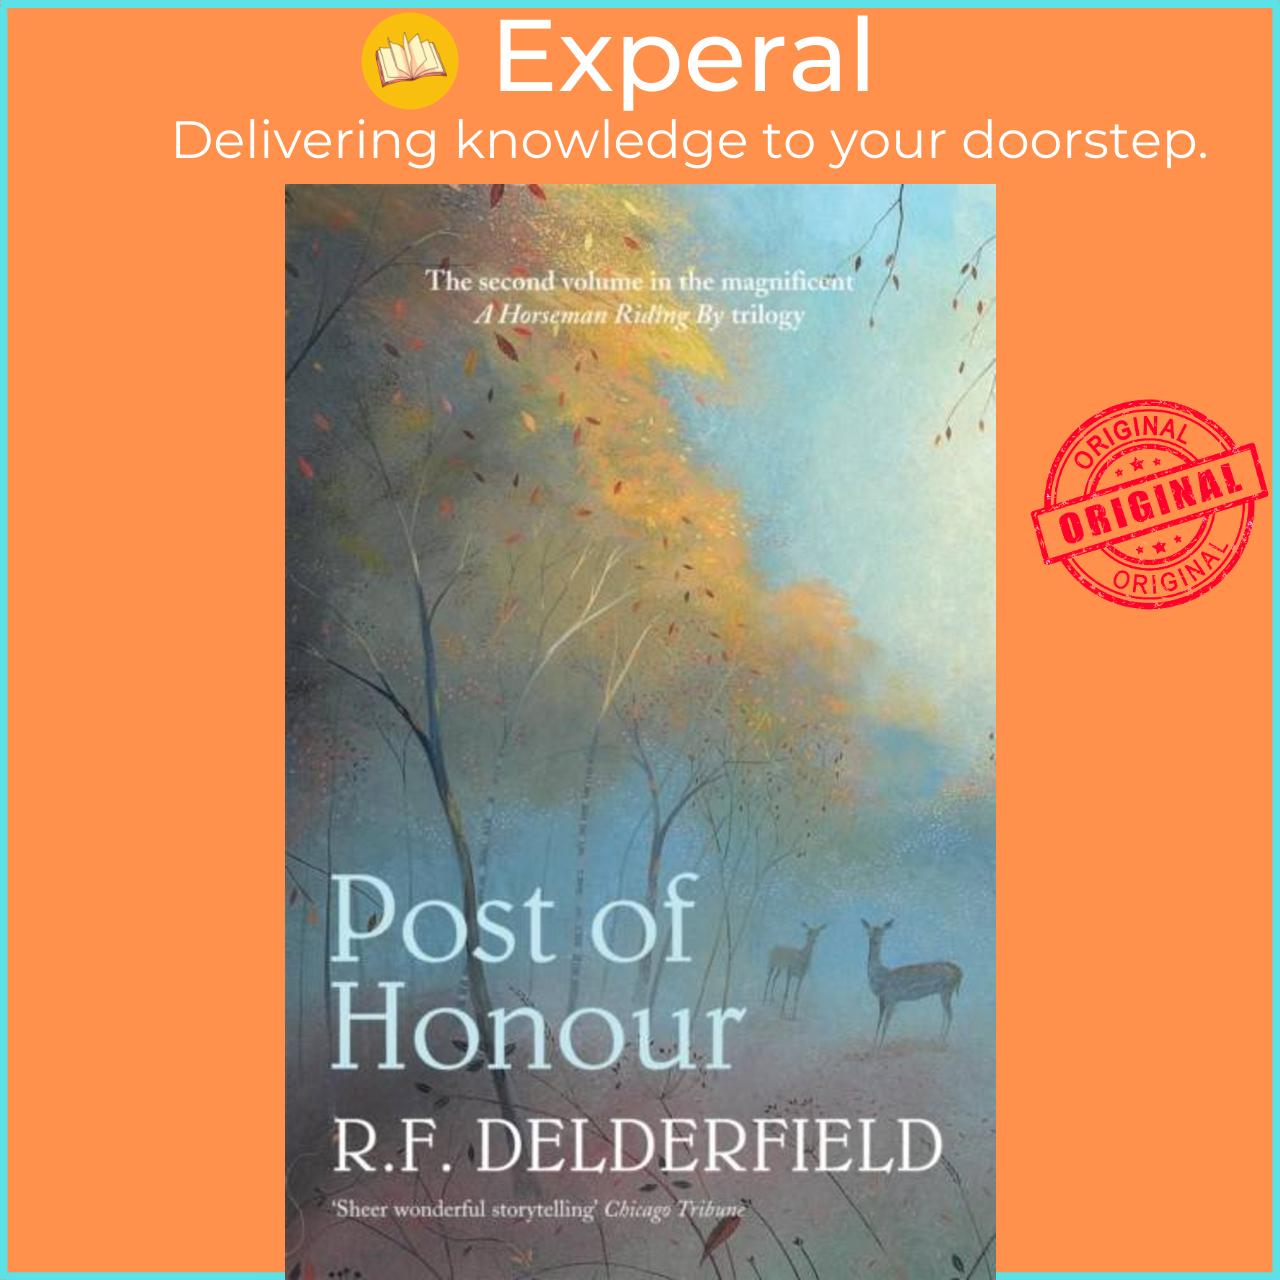 Sách - Post of Honour - The classic saga of life in post-war Britain by R. F. Delderfield (UK edition, paperback)